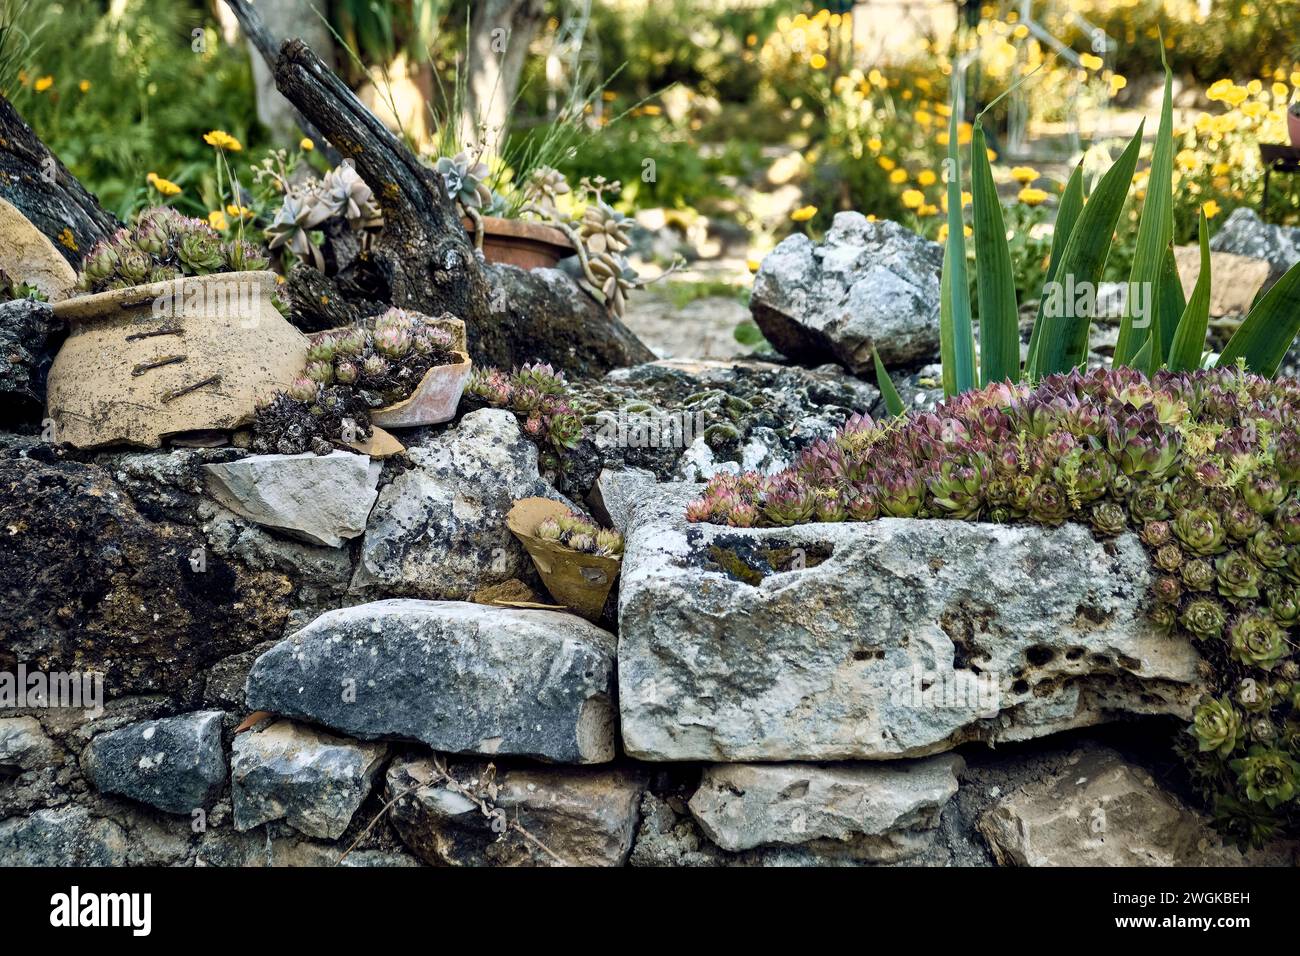 Marigolds (Calendula officinalis), lilies (Iris) and immortelles (Sempervivum) in the patio of a town house. Detail plan in stone planter. Stock Photo